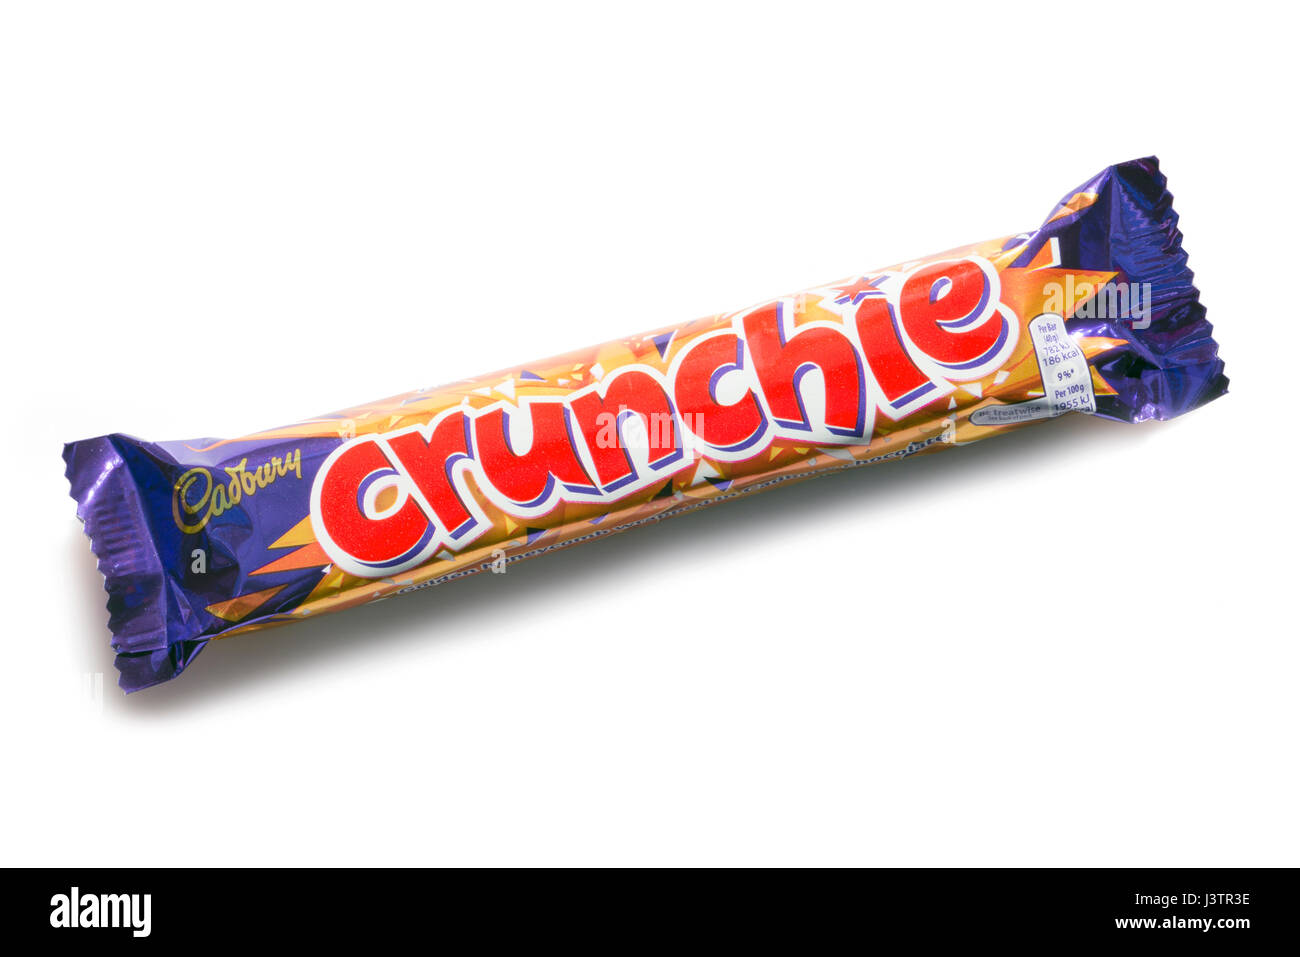 Crunchie bar cut out or isolated against a white background, UK. Stock Photo